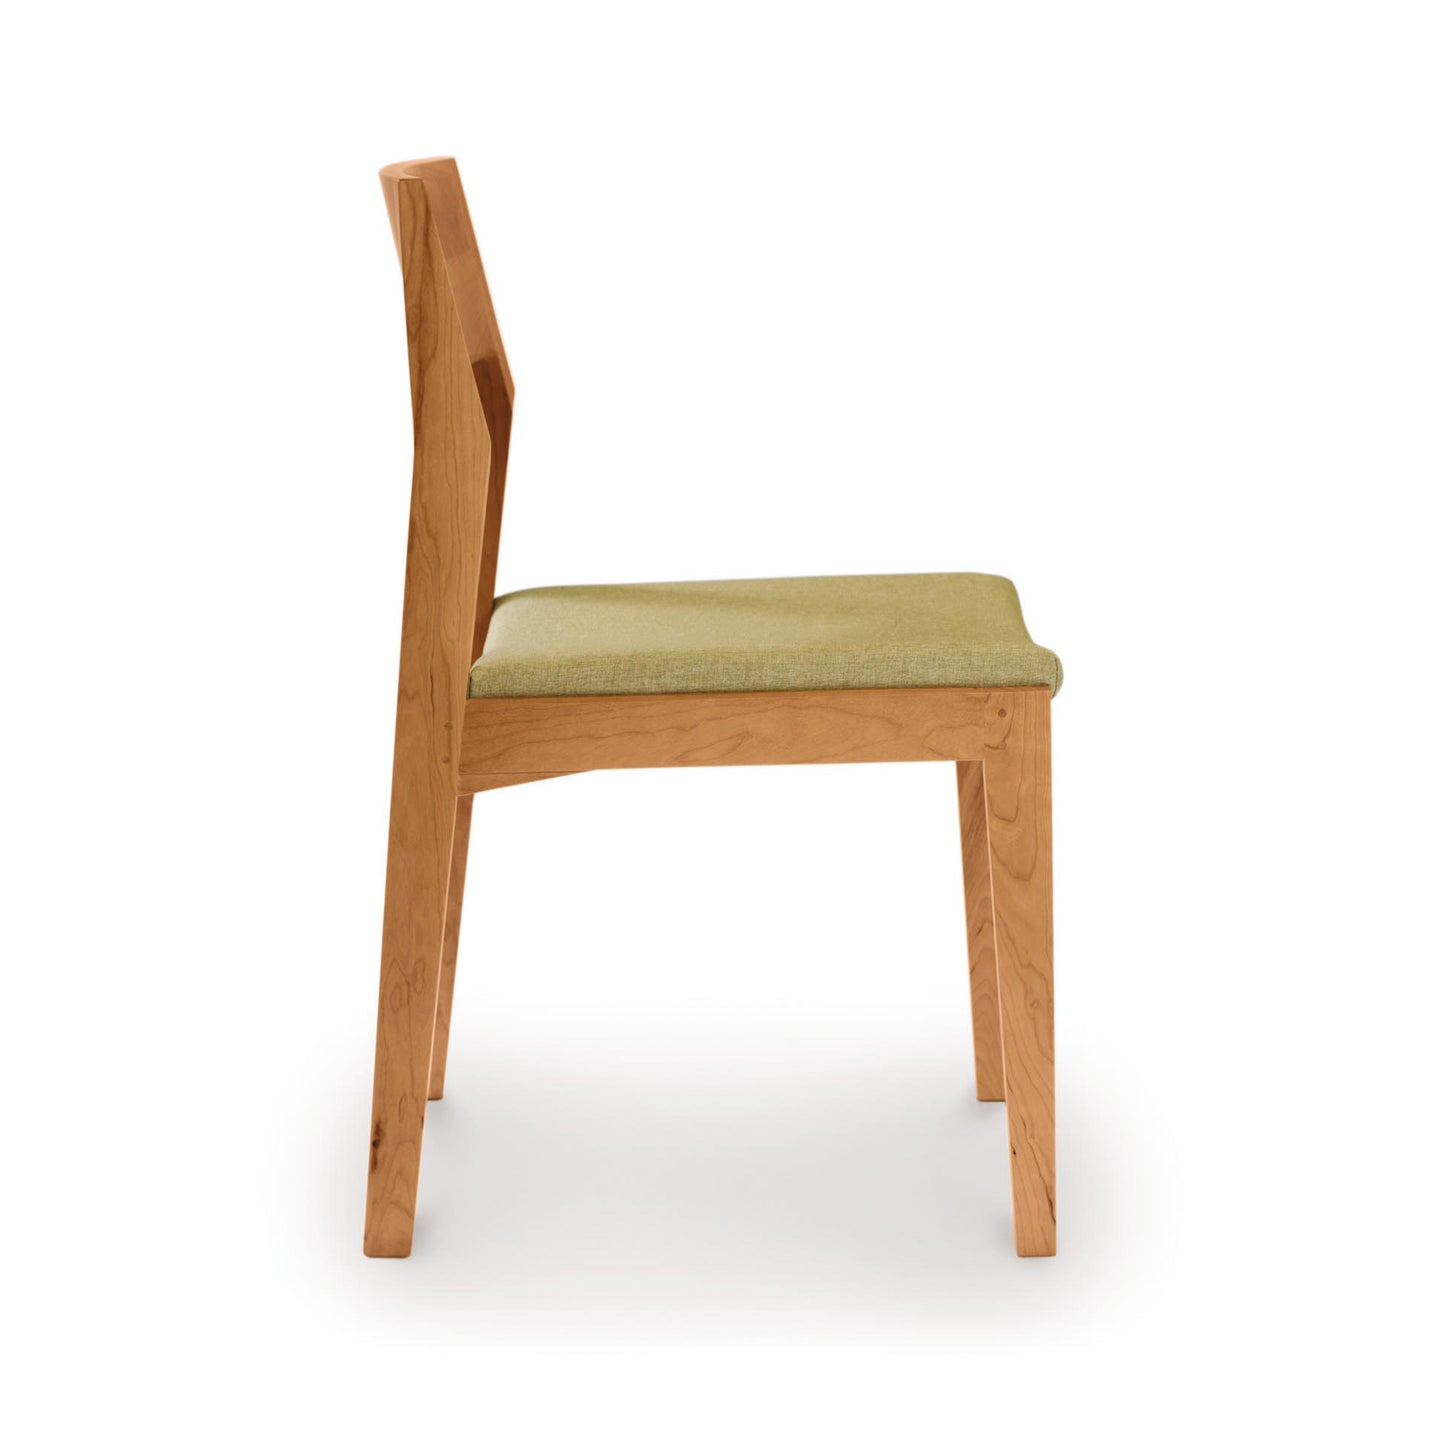 Copeland Furniture's Iso Chair crafted from solid cherry wood, with a green upholstered seat on a white background.